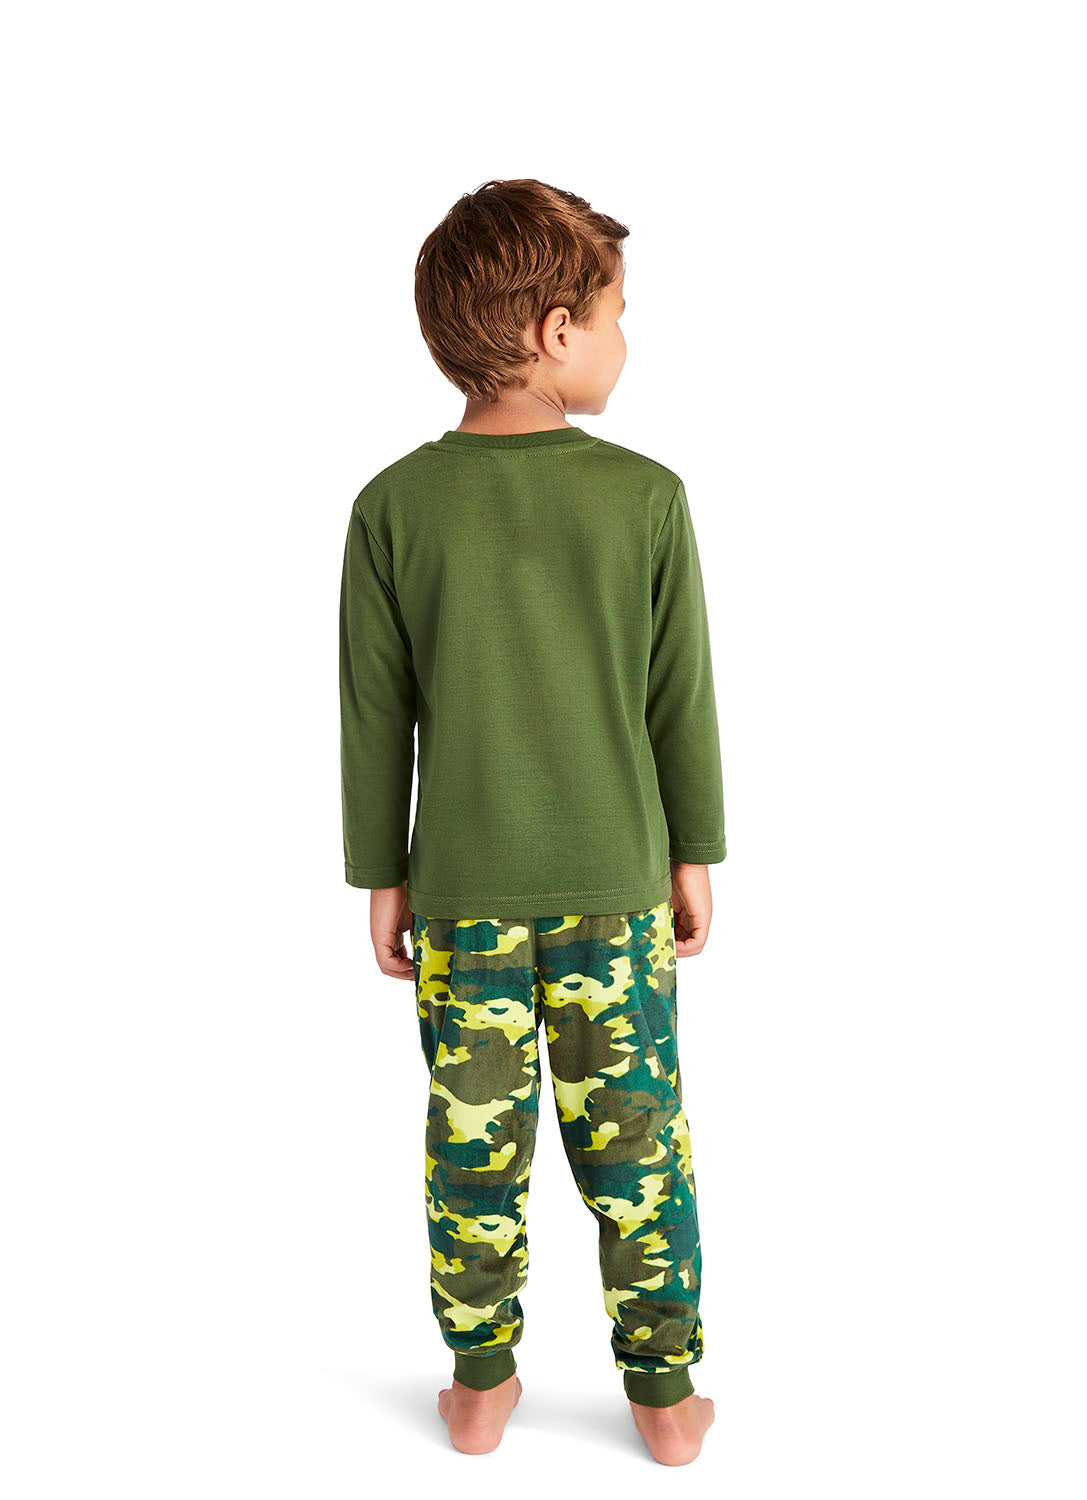 Back view Little boy wearing Pajama Set with print T-Rex Dino plus Camo pants in green colour